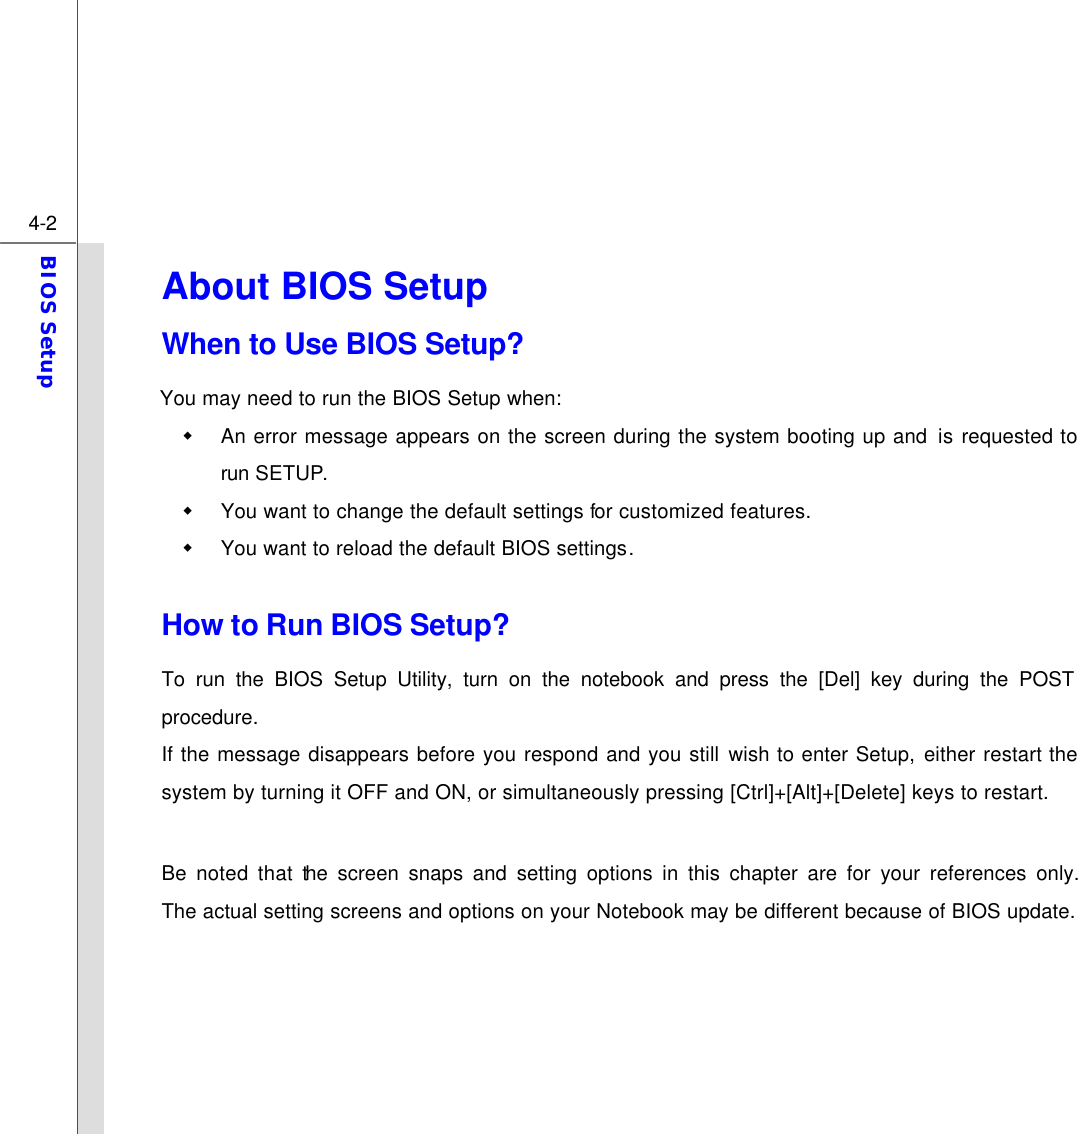  4-2 BIOS Setup  About BIOS Setup   When to Use BIOS Setup? You may need to run the BIOS Setup when: w An error message appears on the screen during the system booting up and is requested to run SETUP. w You want to change the default settings for customized features. w You want to reload the default BIOS settings.  How to Run BIOS Setup? To run the BIOS Setup Utility, turn on the notebook and press the [Del] key during the POST procedure. If the message disappears before you respond and you still wish to enter Setup, either restart the system by turning it OFF and ON, or simultaneously pressing [Ctrl]+[Alt]+[Delete] keys to restart.  Be noted that the screen snaps and setting options in this chapter are for your references only.  The actual setting screens and options on your Notebook may be different because of BIOS update.      